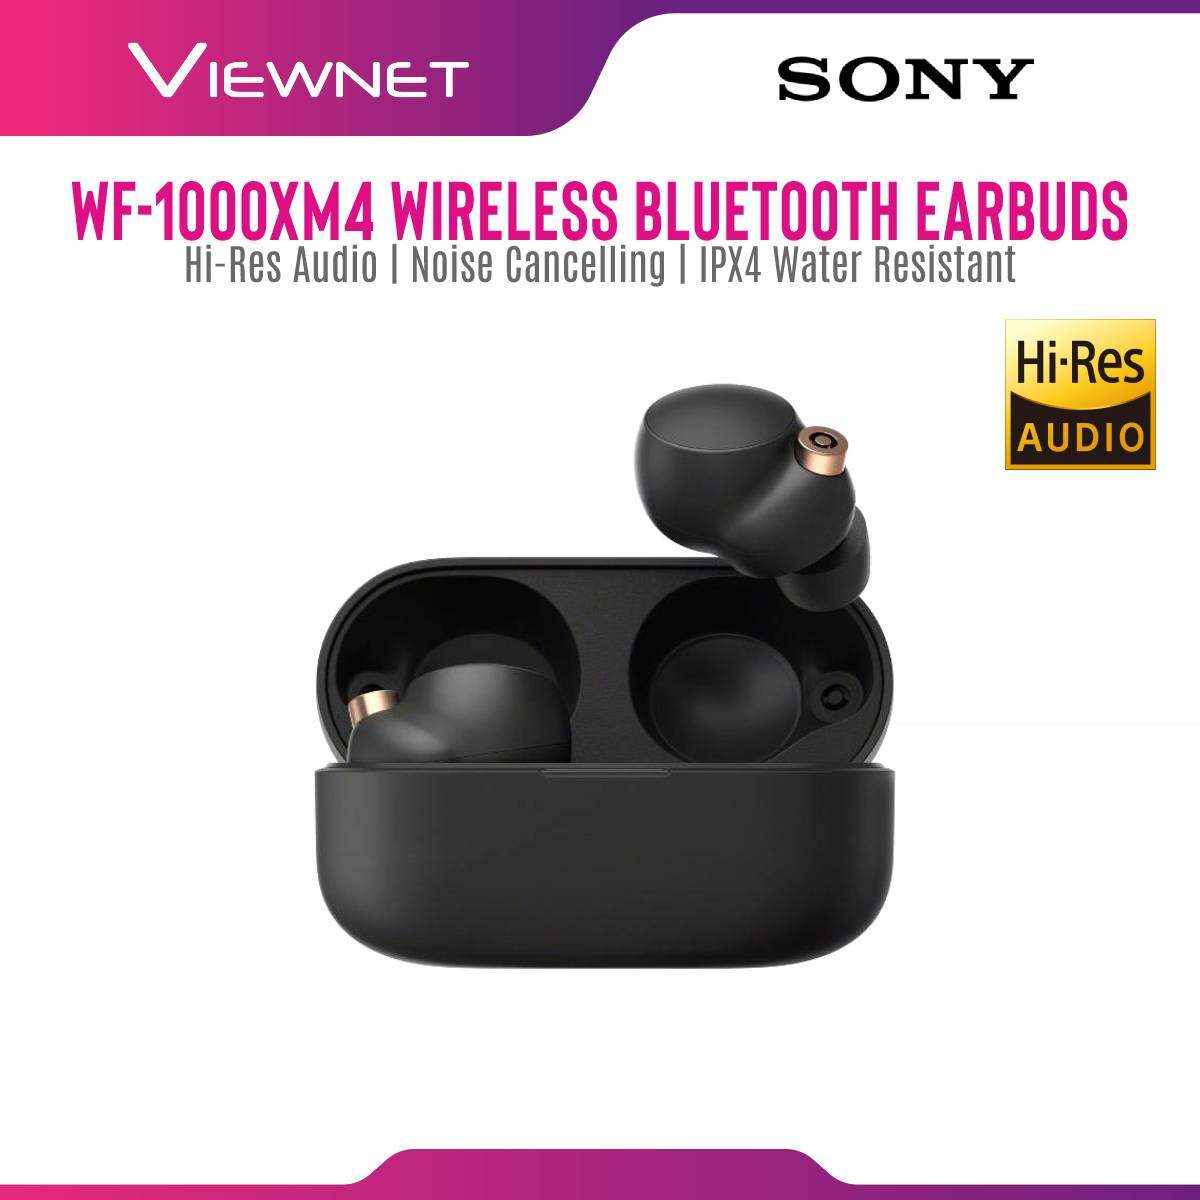 [NEW LAUNCH] Sony WF-1000XM4 / WF1000XM4 XM4 Wireless Bluetooth Noise Cancelling In Ear Earbuds with Charging Case, IPX4 Water Resistance